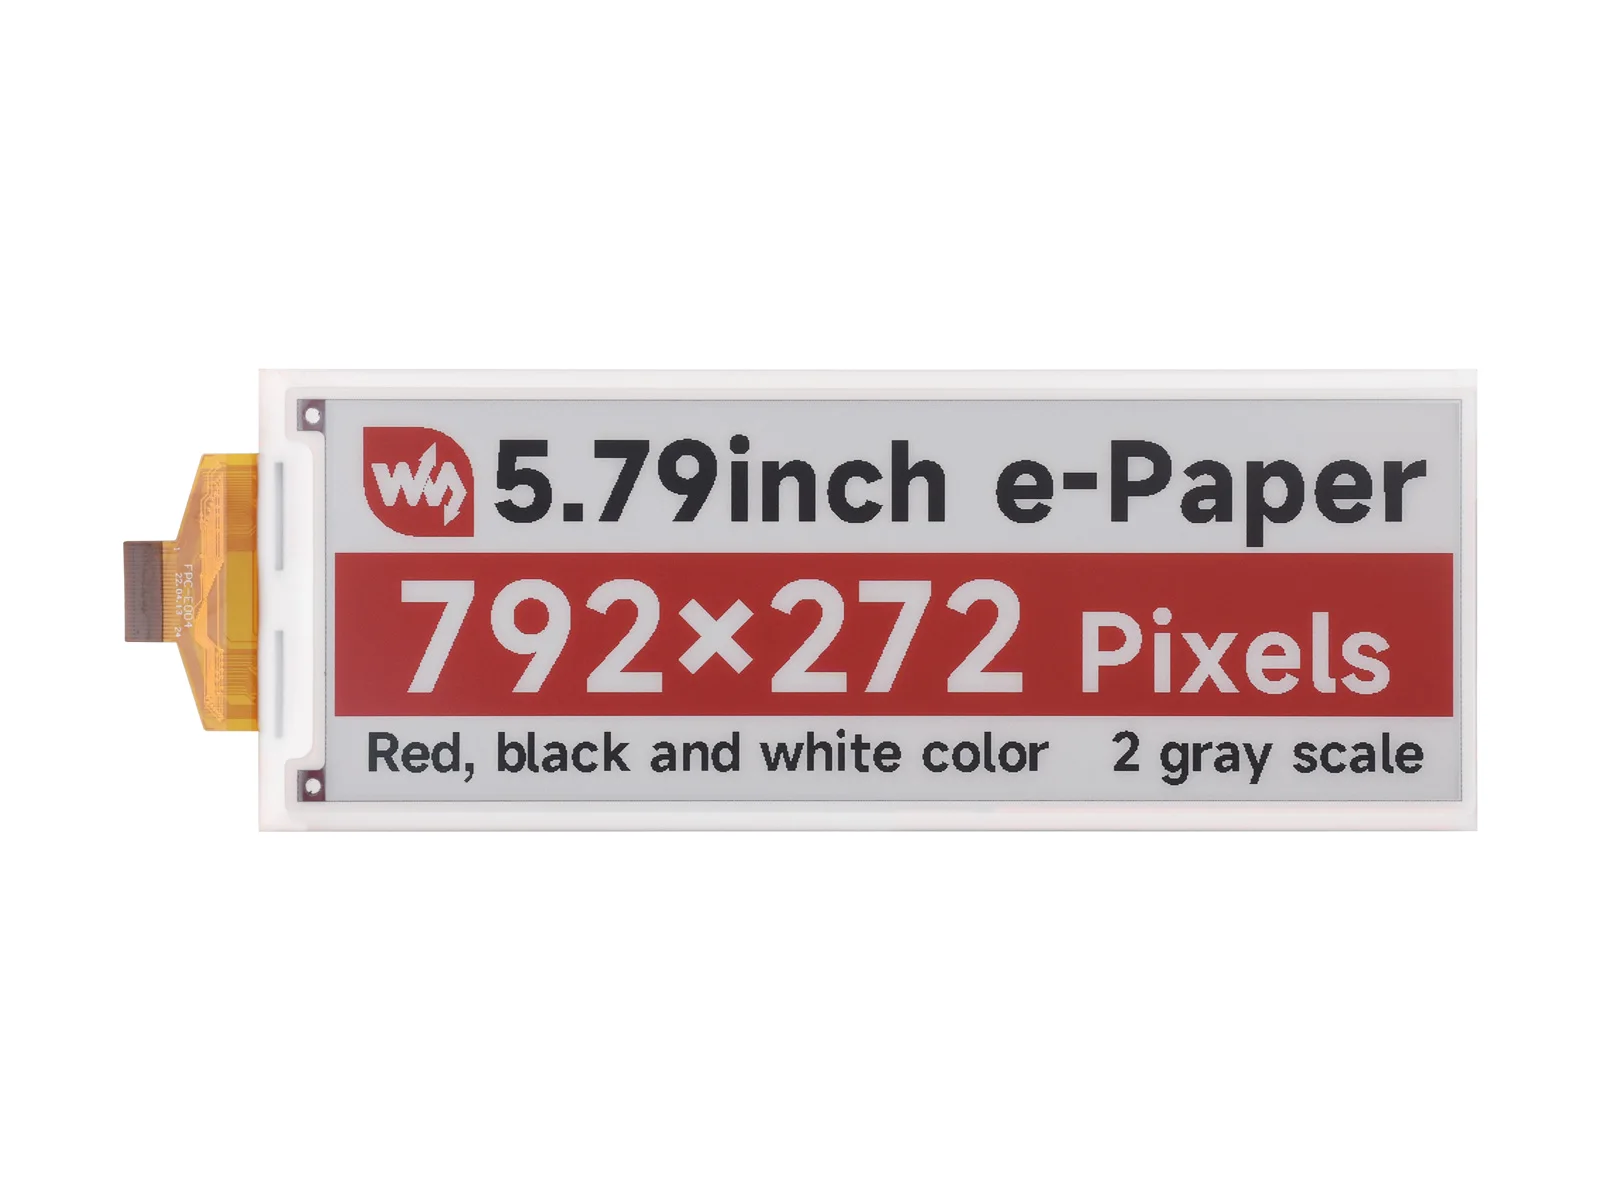 

5.79inch E-Paper (B) raw display, e-ink display, 792x272,Red/Black/White,SPI Communication,Paper-Like Effect Without Electricity